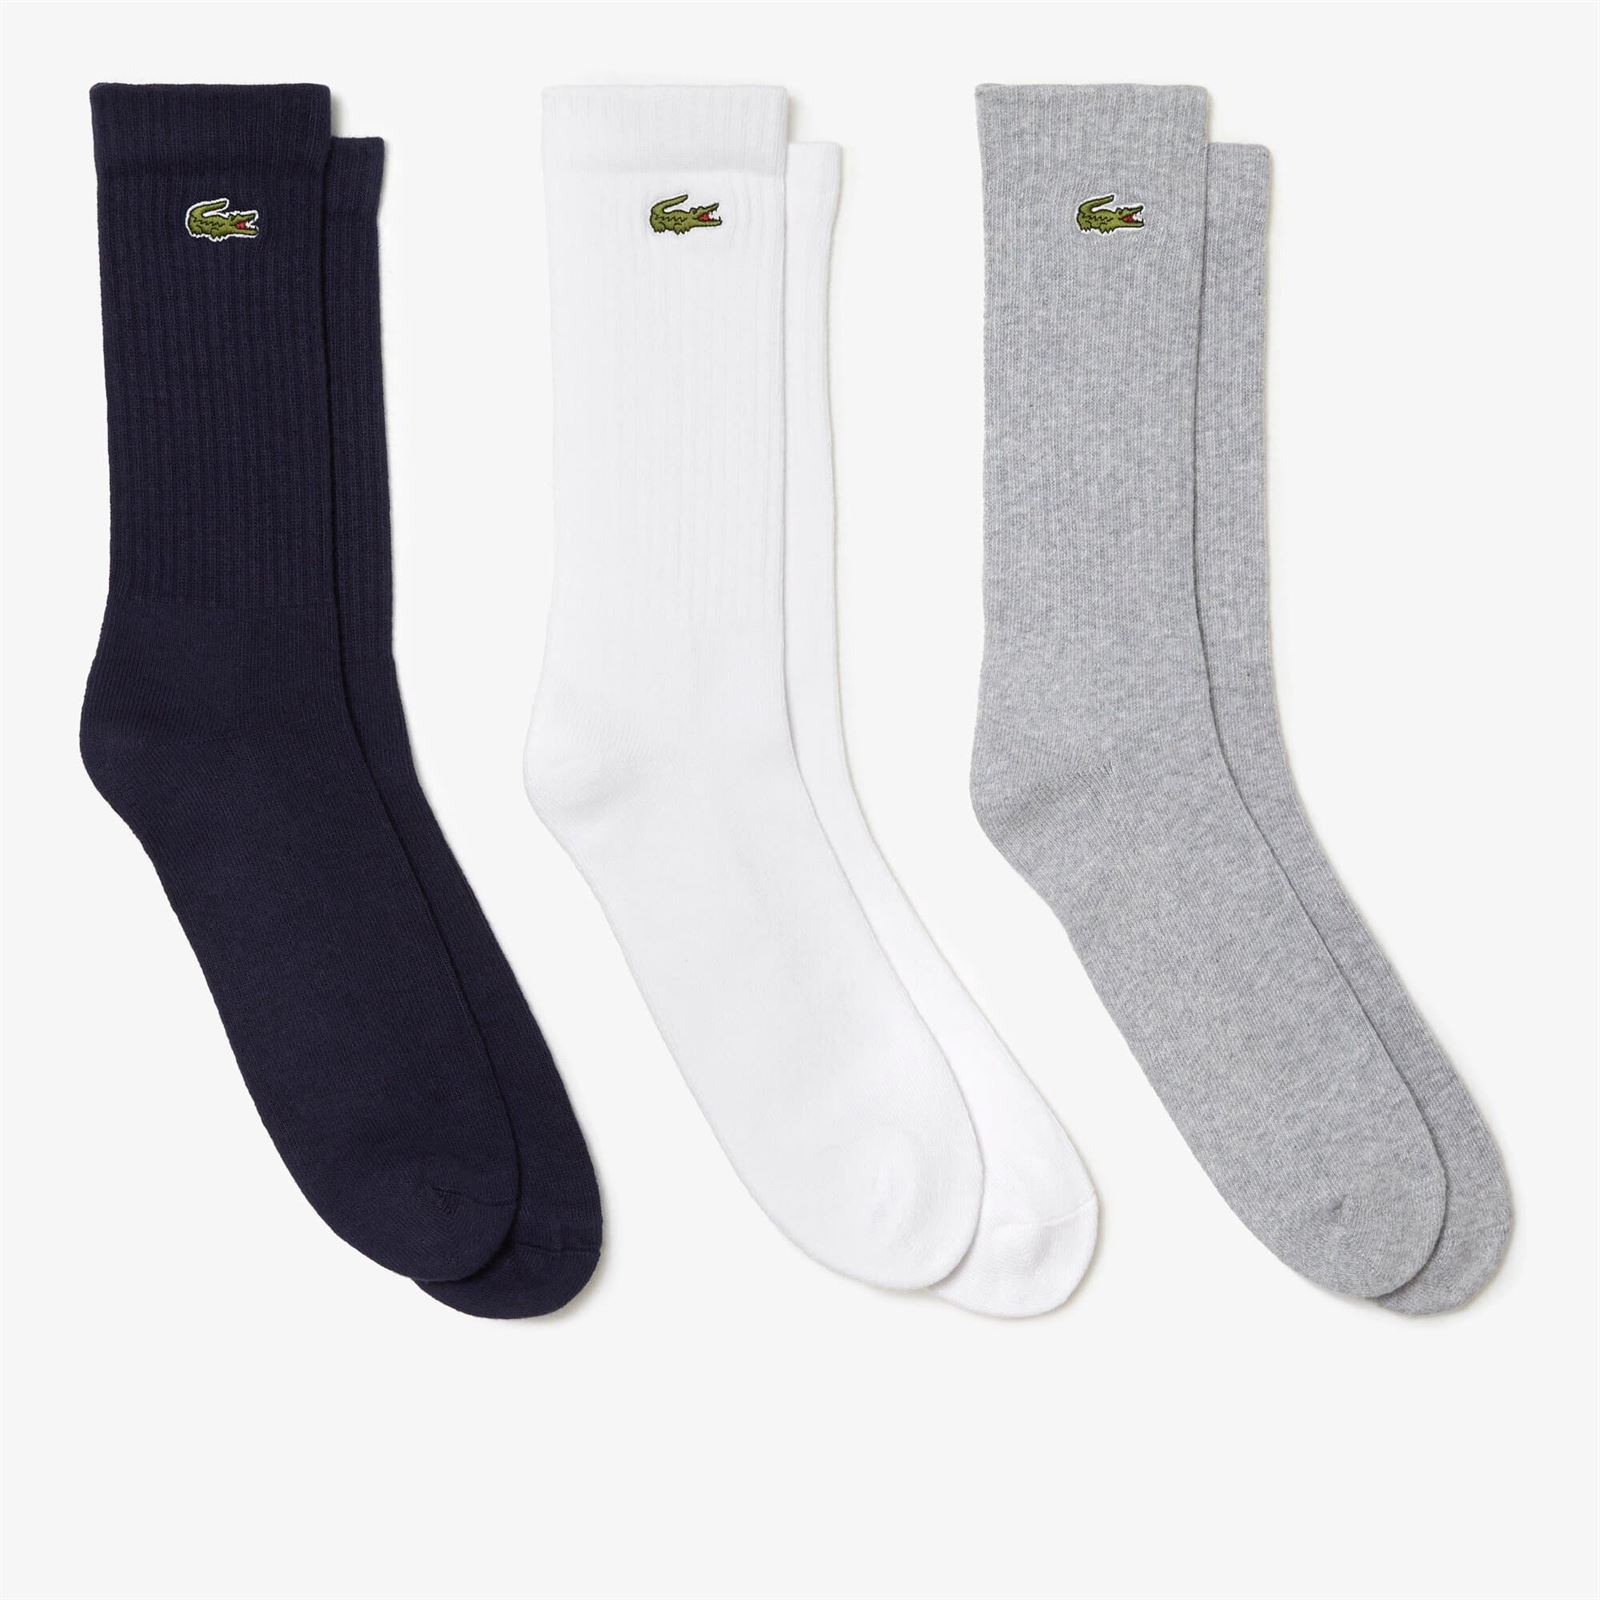 Pack 3 calcetines LACOSTE RA4182 TYA argent chine/blanc - Imagen 1